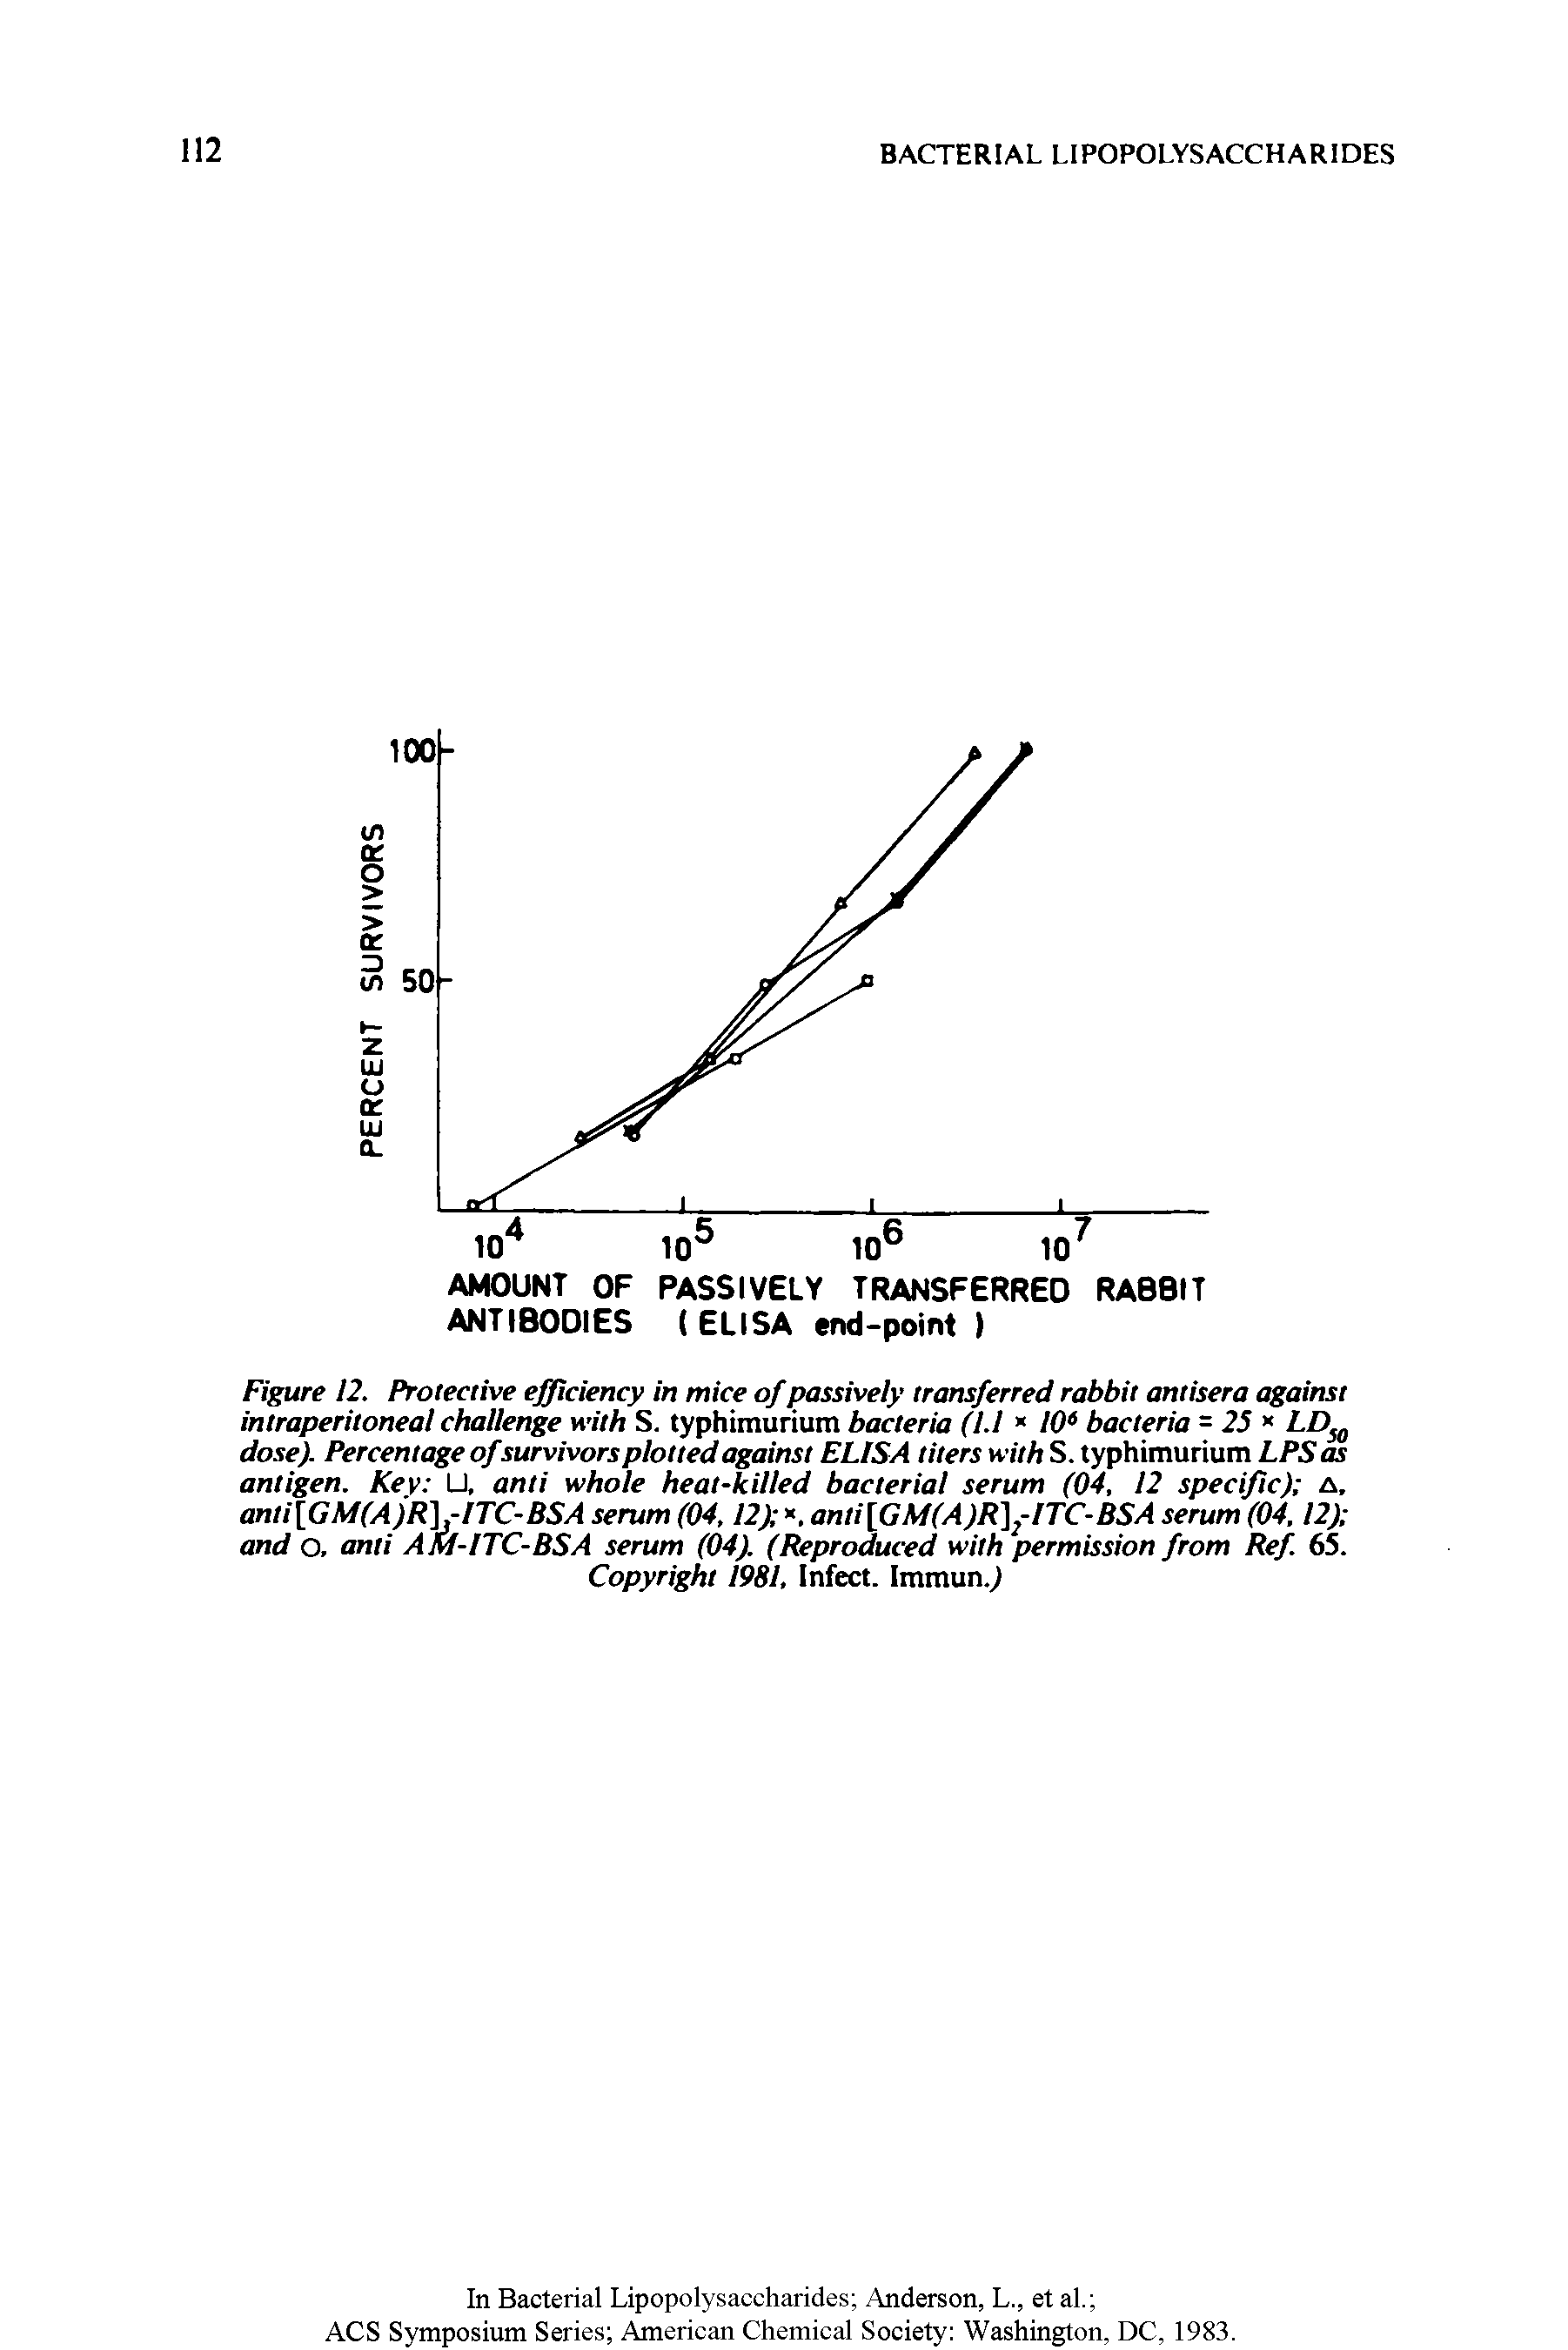 Figure 12. Protective efficiency in mice of passively transferred rabbit antisera against intraperitoneal challenge with S. typhimurium bacteria (U 106 bacteria = 25 LD 0 dose). Percentage ofsurvivors plotted against ELISA titers with S. typhimurium LPS as antigen. Key U, anti whole heat-killed bacterial serum (04, 12 specific) a, anti[GM(A )R],-ITC-BSA serum (04,12) . anti[GM(A )R]2-ITC-BSA serum (04,12) and o, anti AM-ITC-BSA serum (04). (Reproduced with permission from Ref. 65. Copyright 1981, Infect. Immun.j...